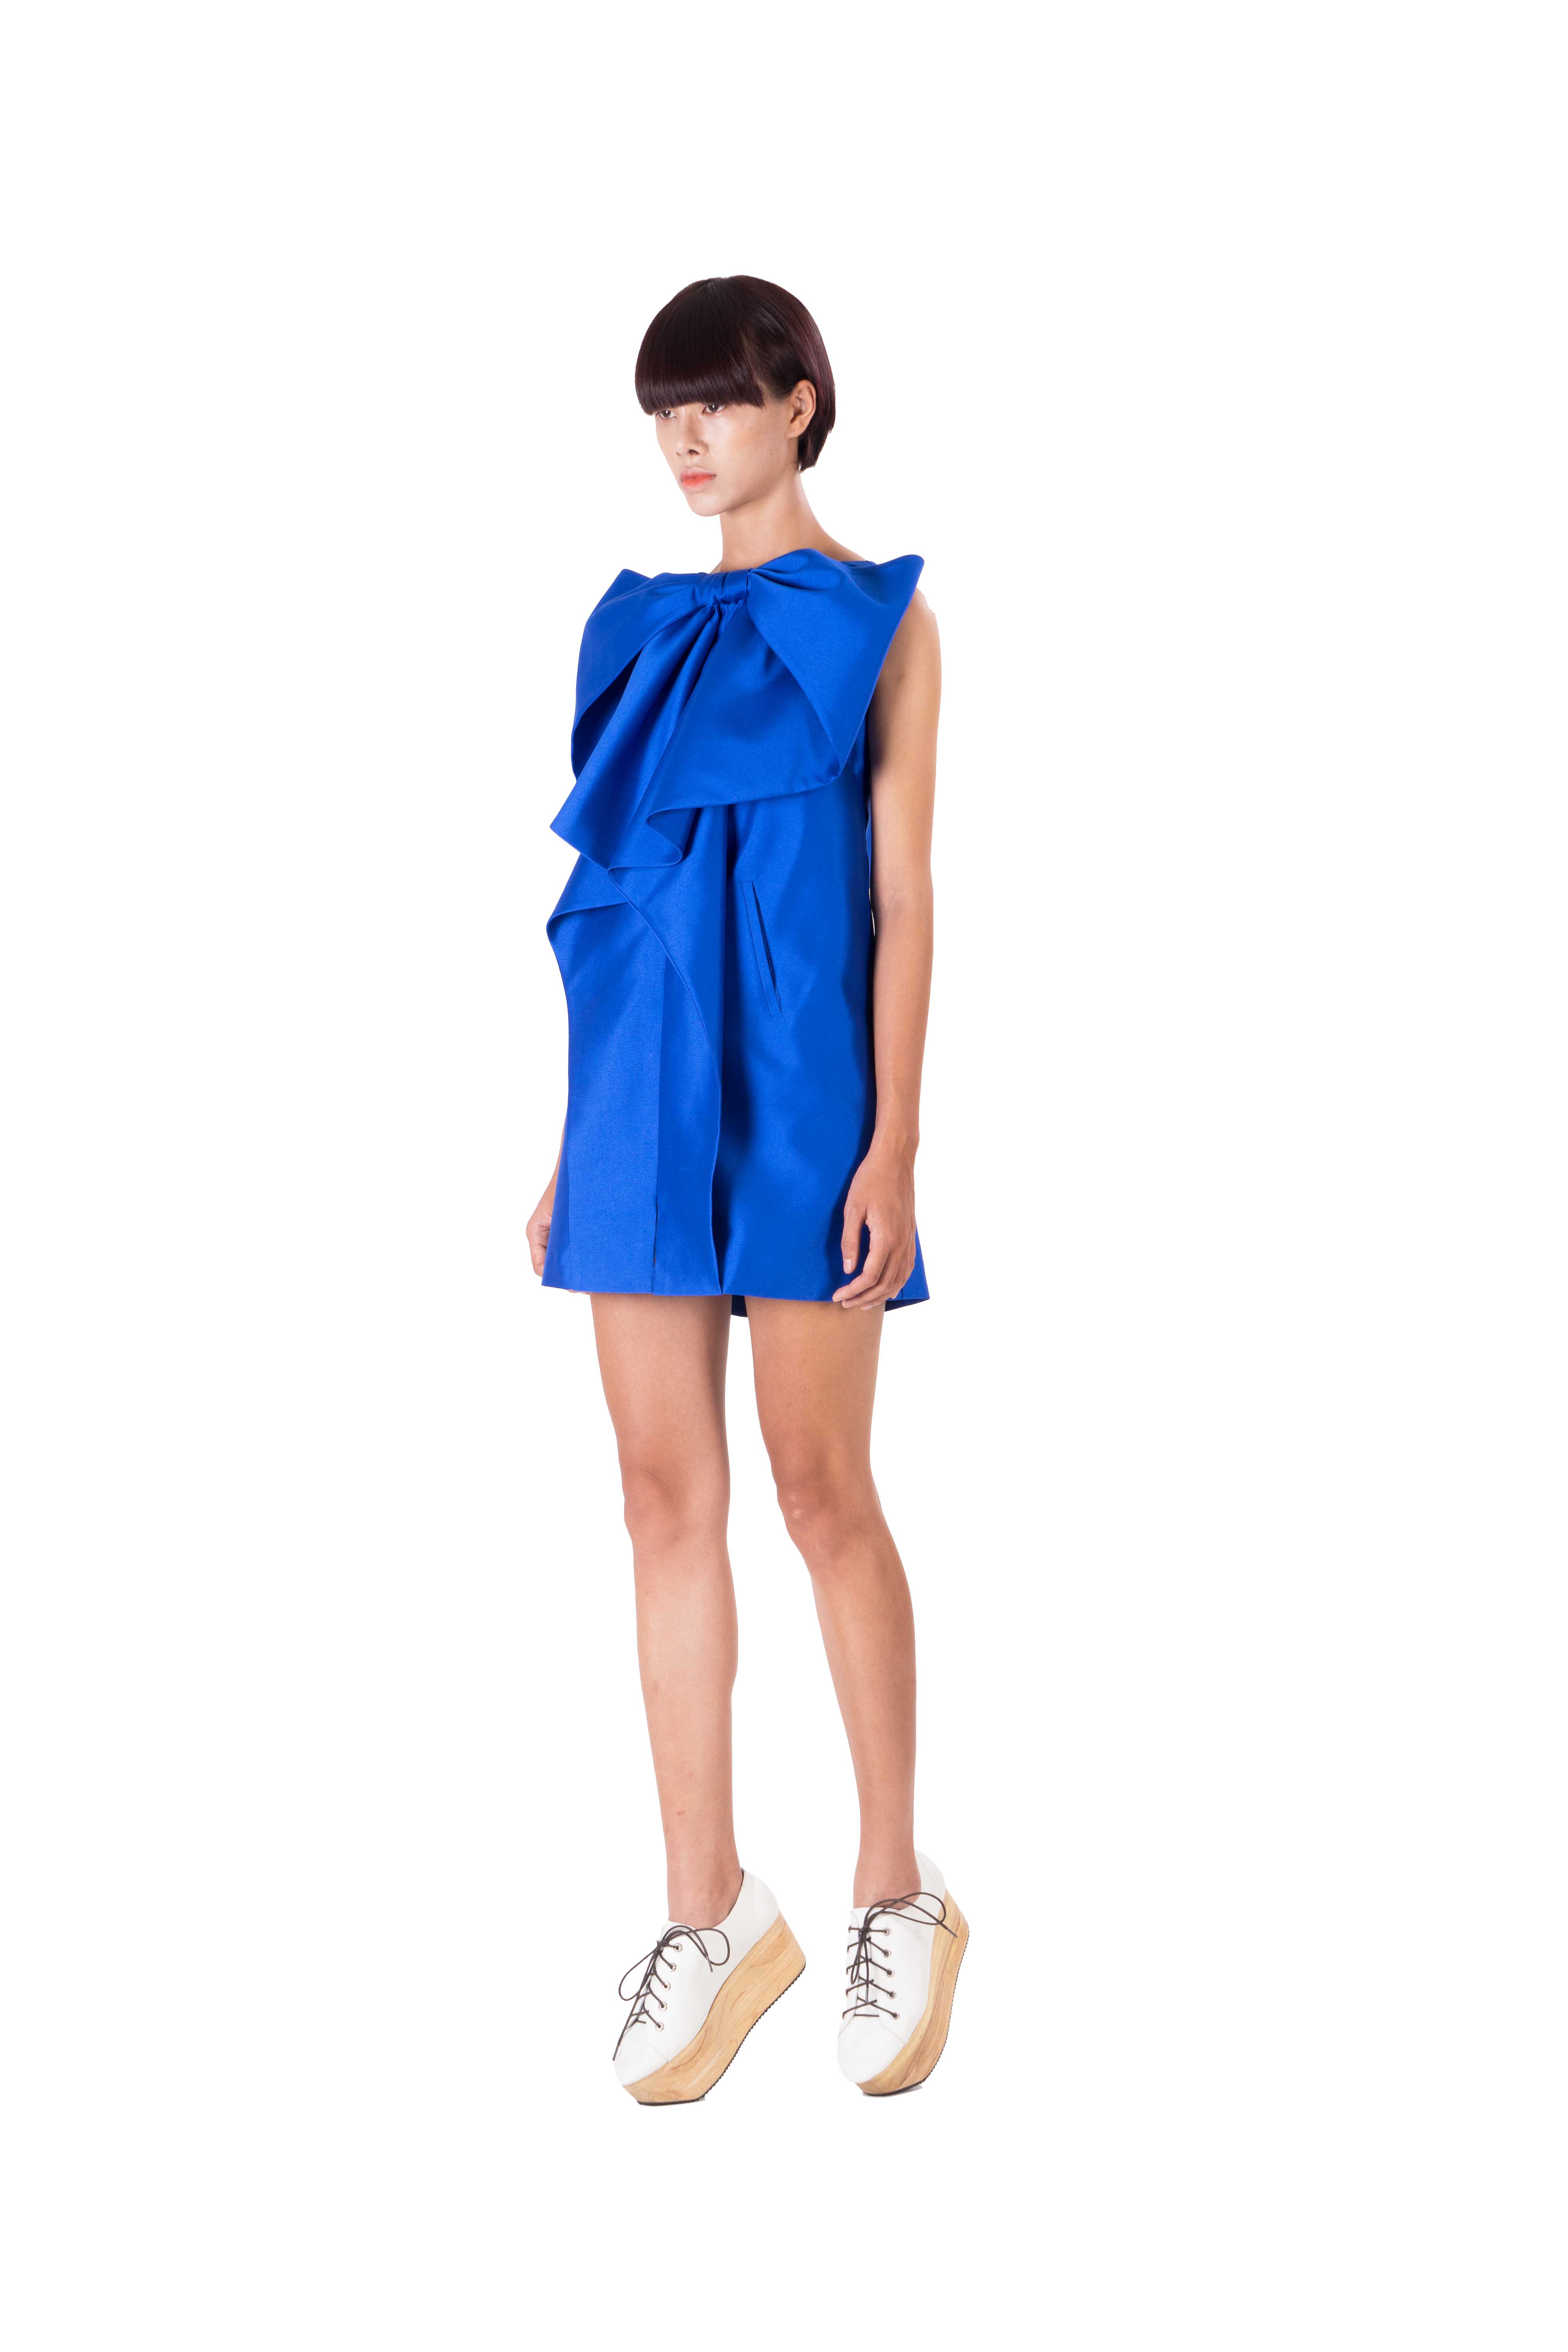 Blue cocktail dress with big bow at front